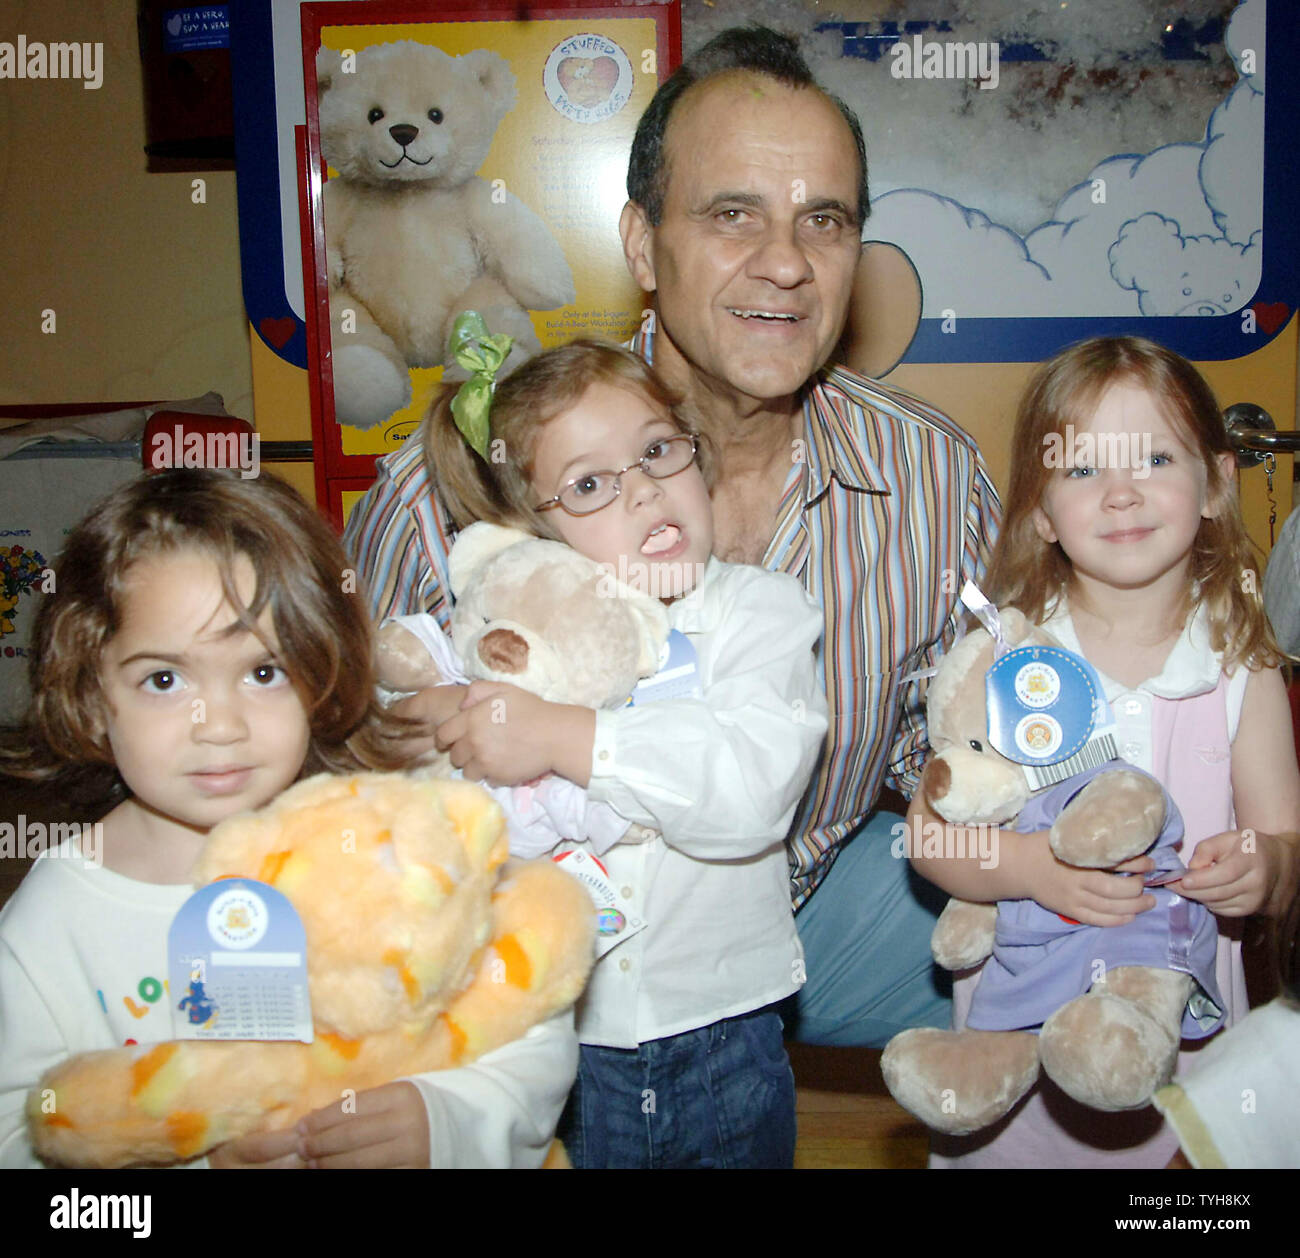 New York Yankee's manager Joe Torre poses with children who joined